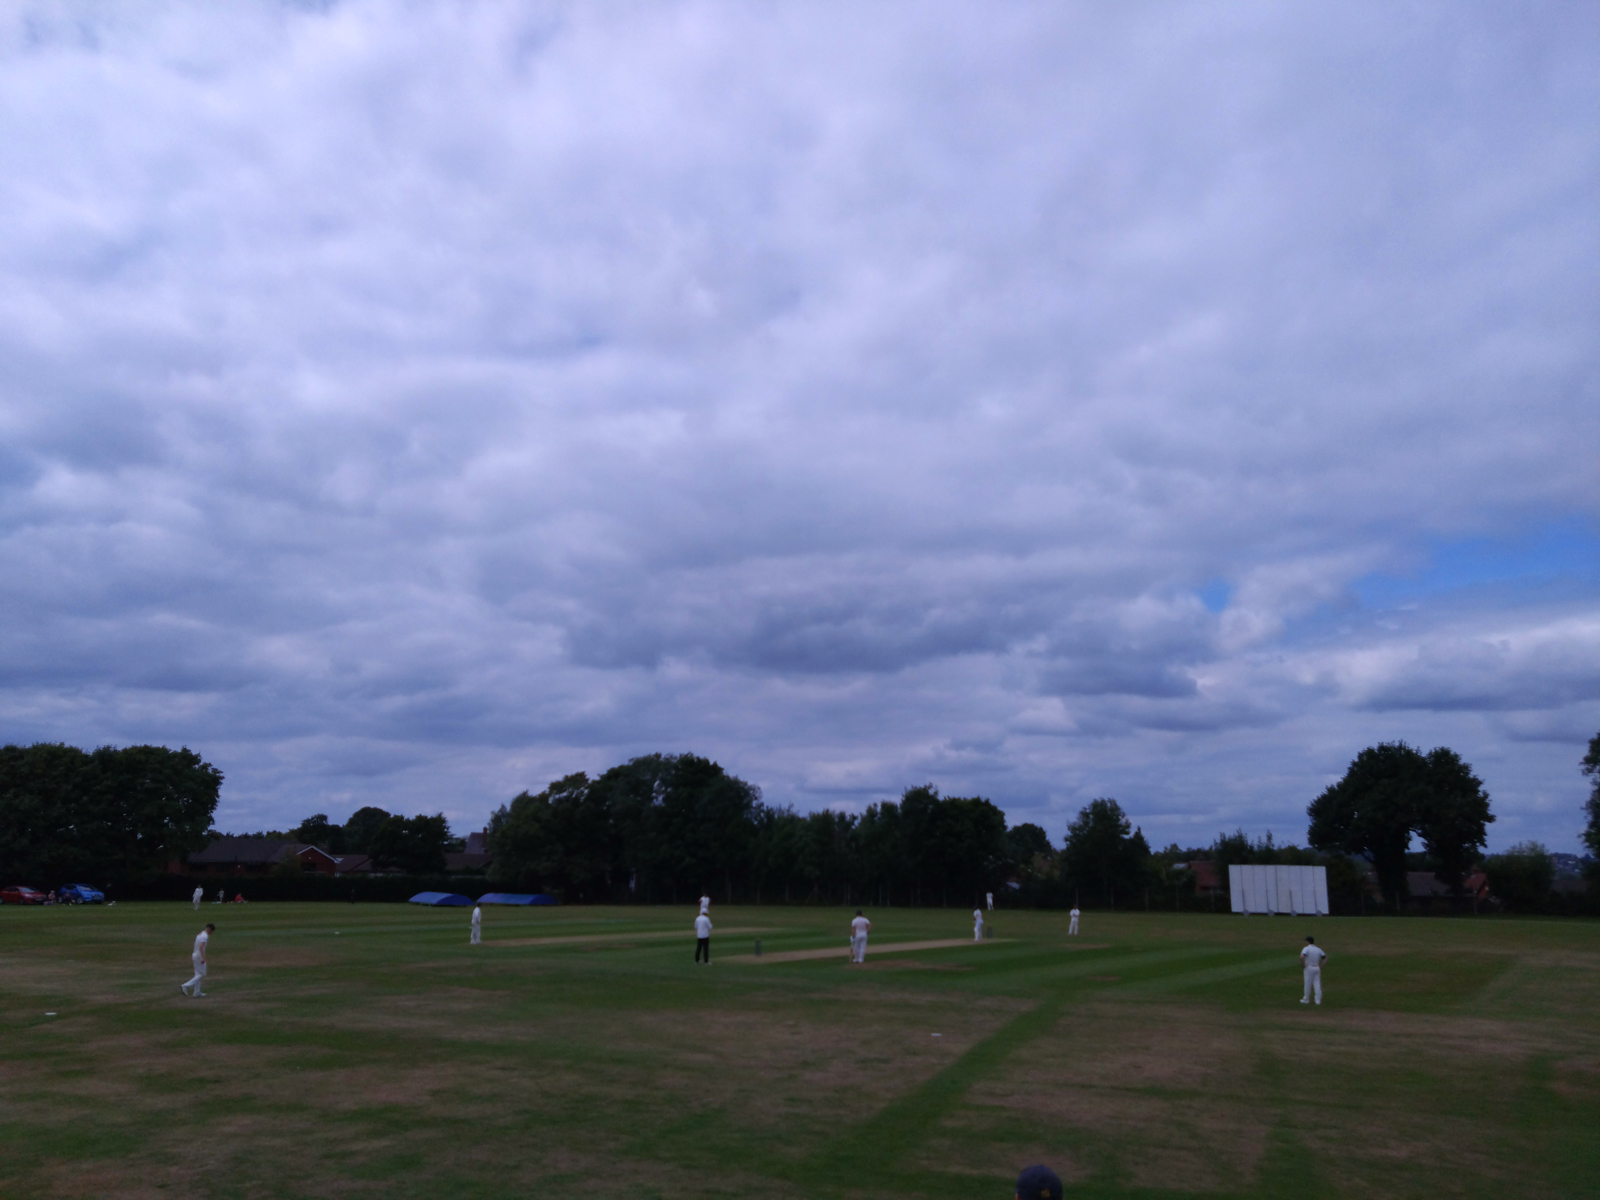 Sony Xperia 10 IV camera sample showing a cricket pitch